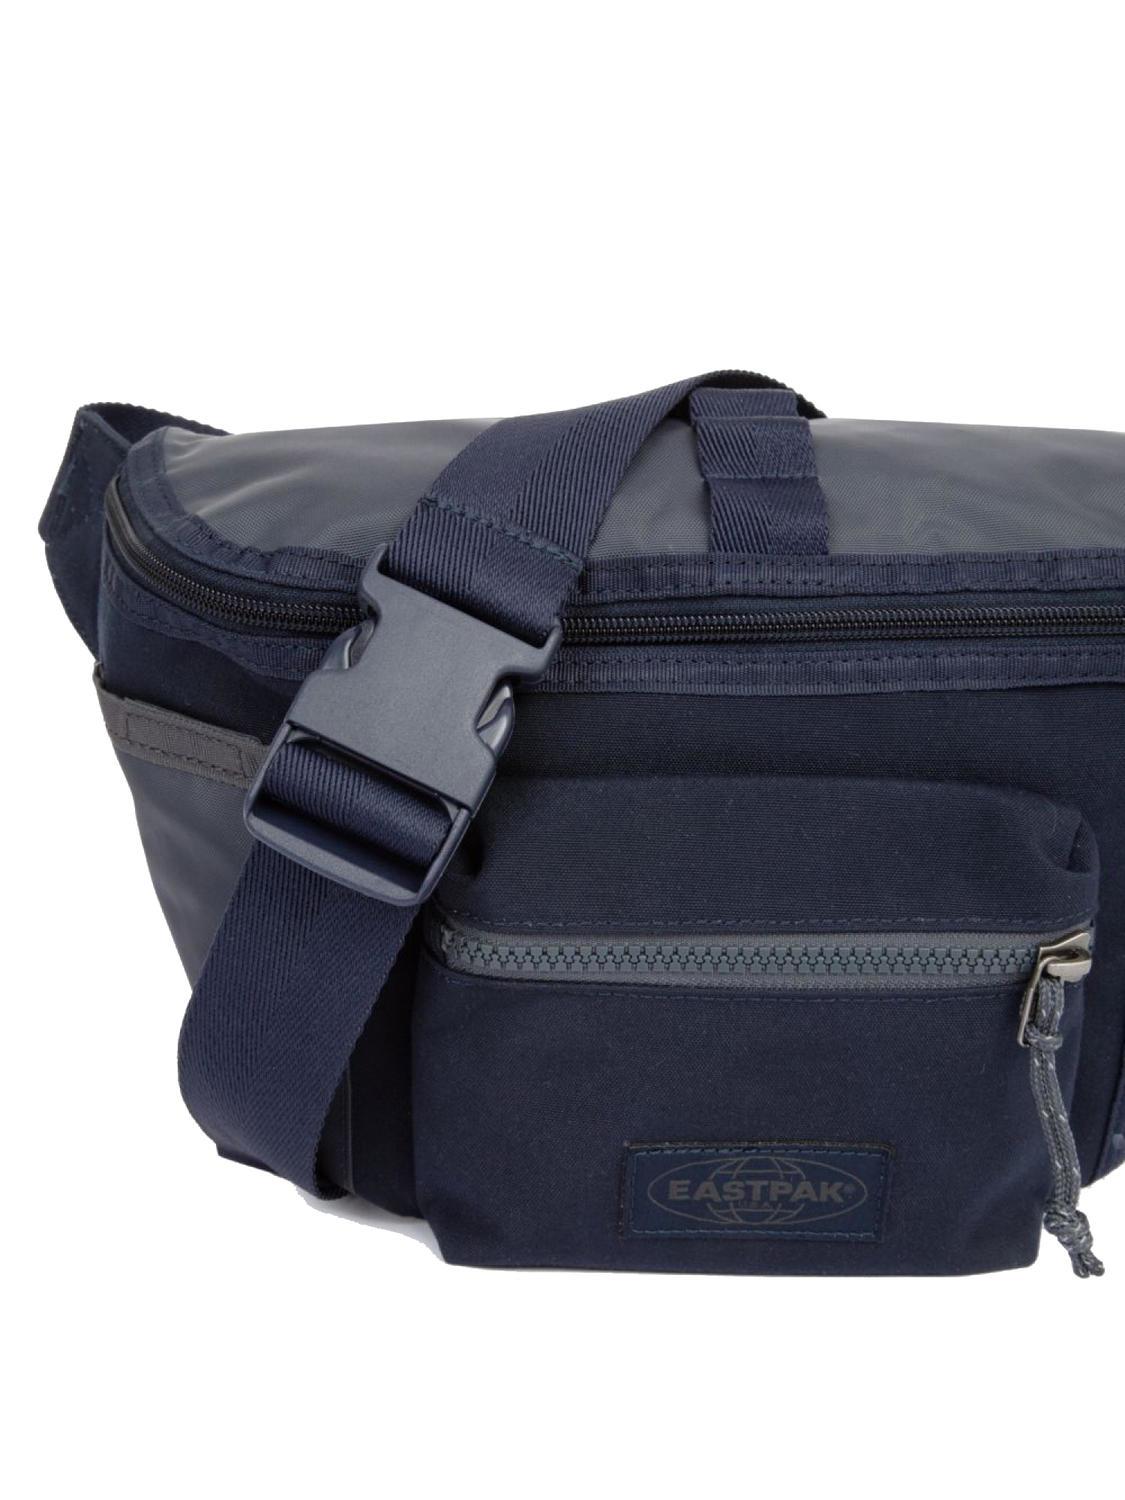 Eastpak Cian Marsupio Multitasche Roothed Blocked - Acquista A Prezzi  Outlet!